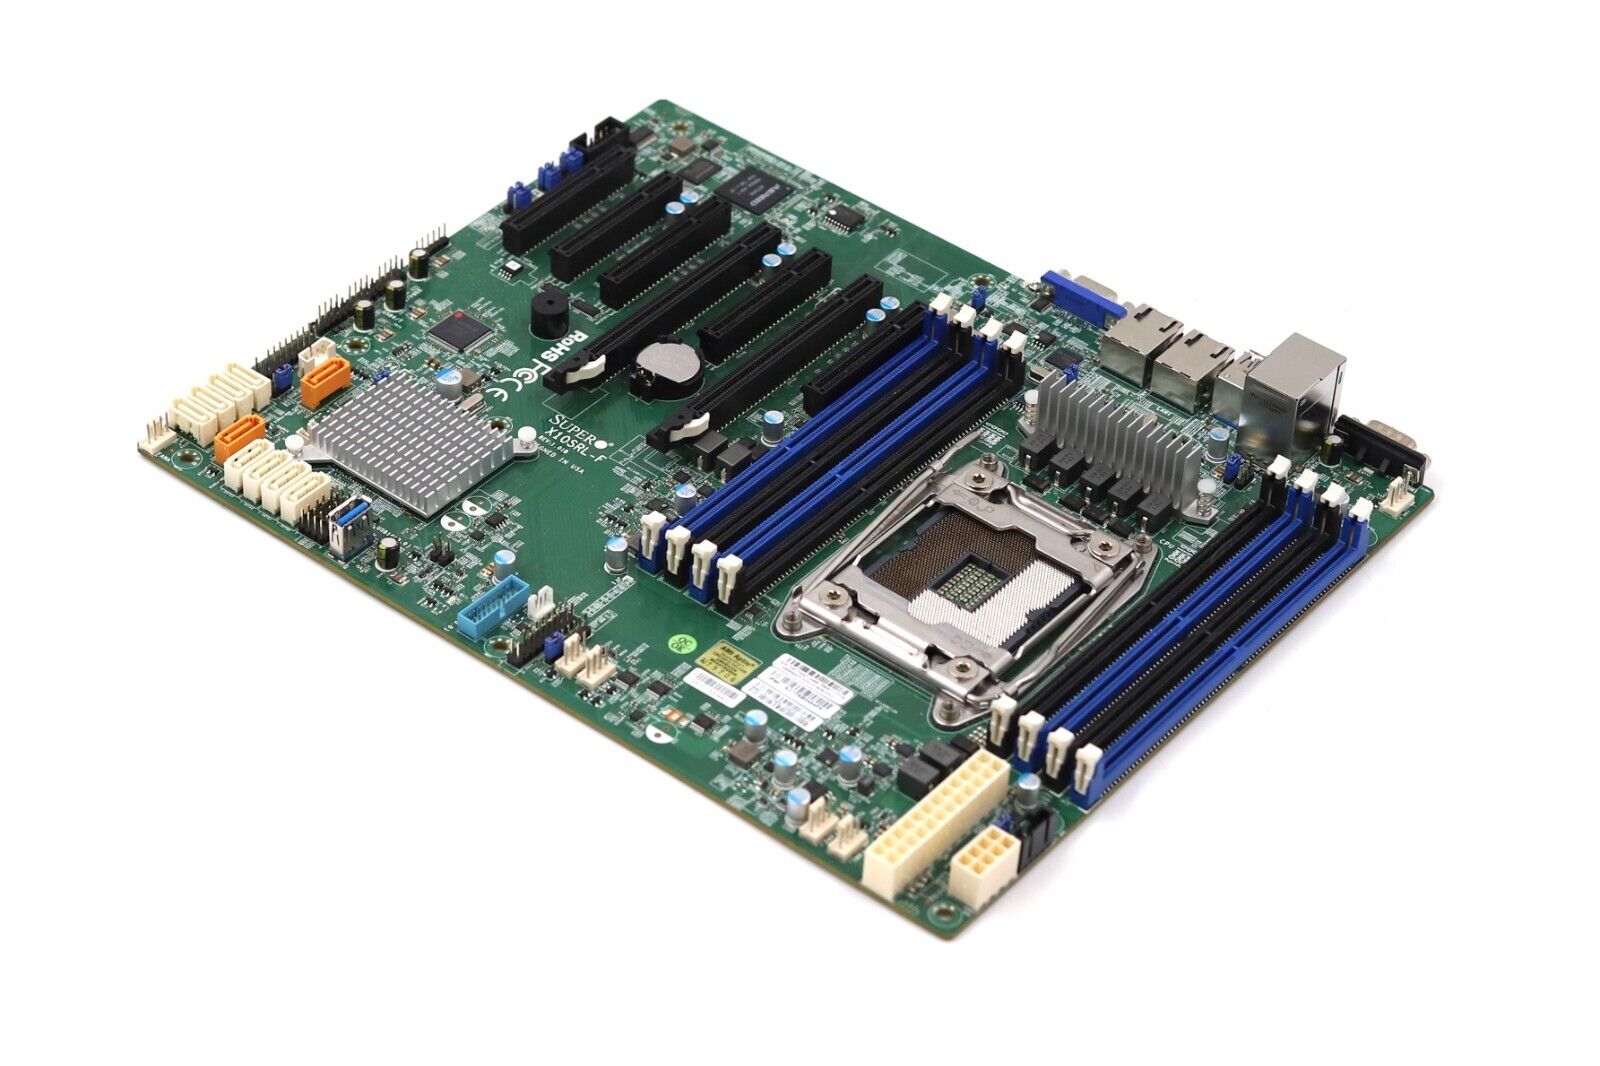 SuperMicro X10SRL-F DDR4 LGA 2011 Server Motherboard Tested Working